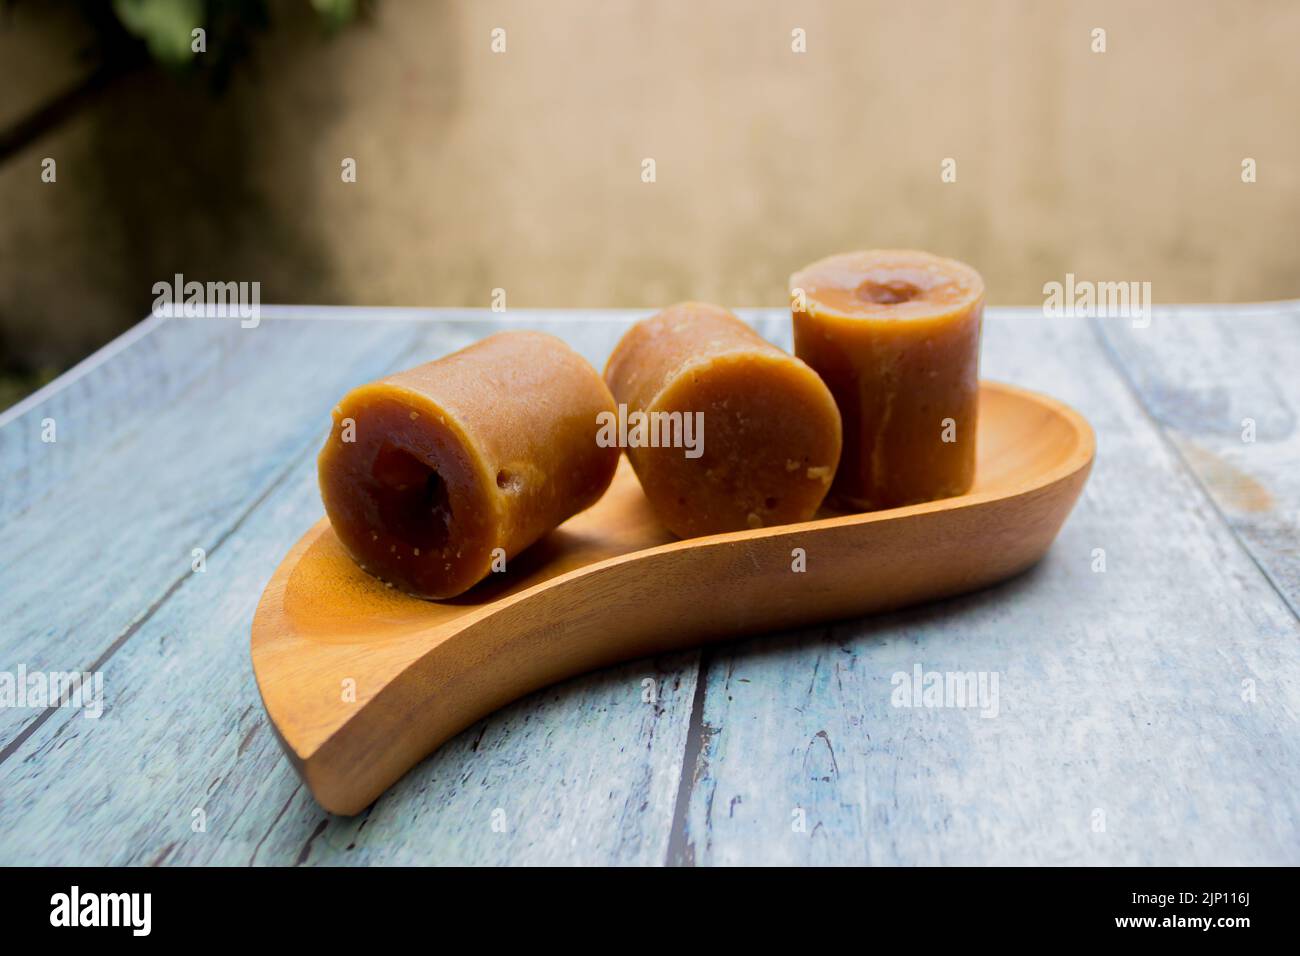 Indonesian brown sugar, palm sugar or gula merah in cubes with wooden tray Stock Photo